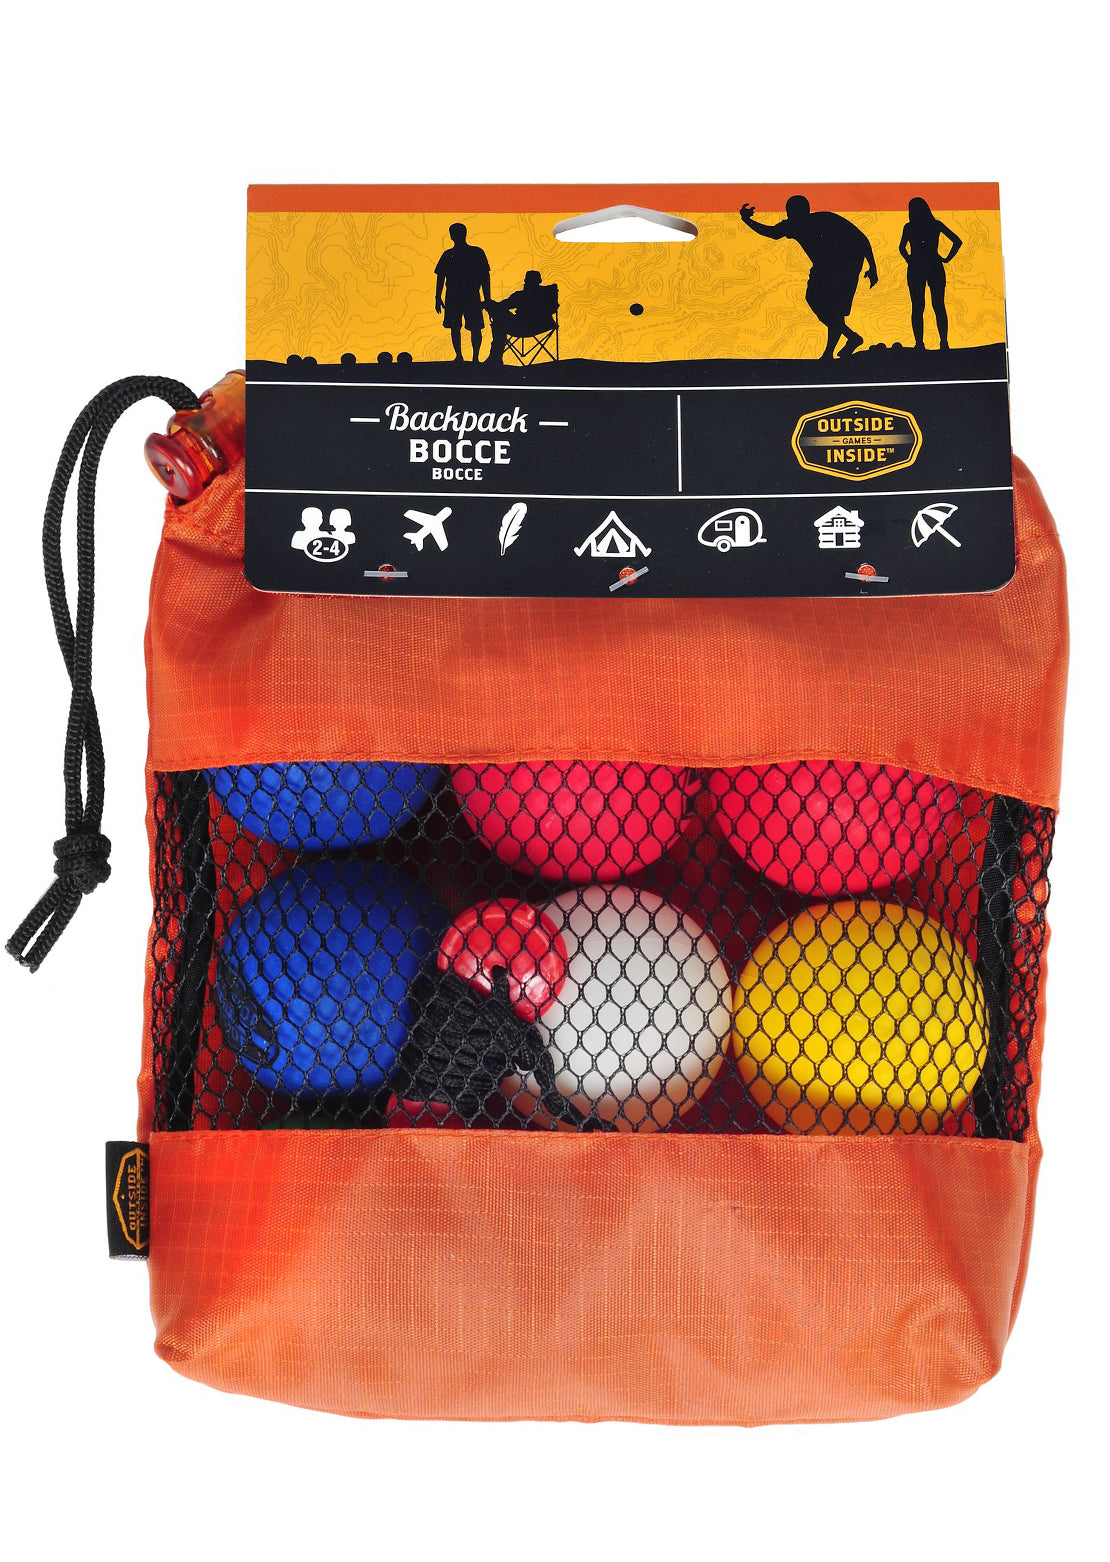 GSI Backpack Bocce Game Packed